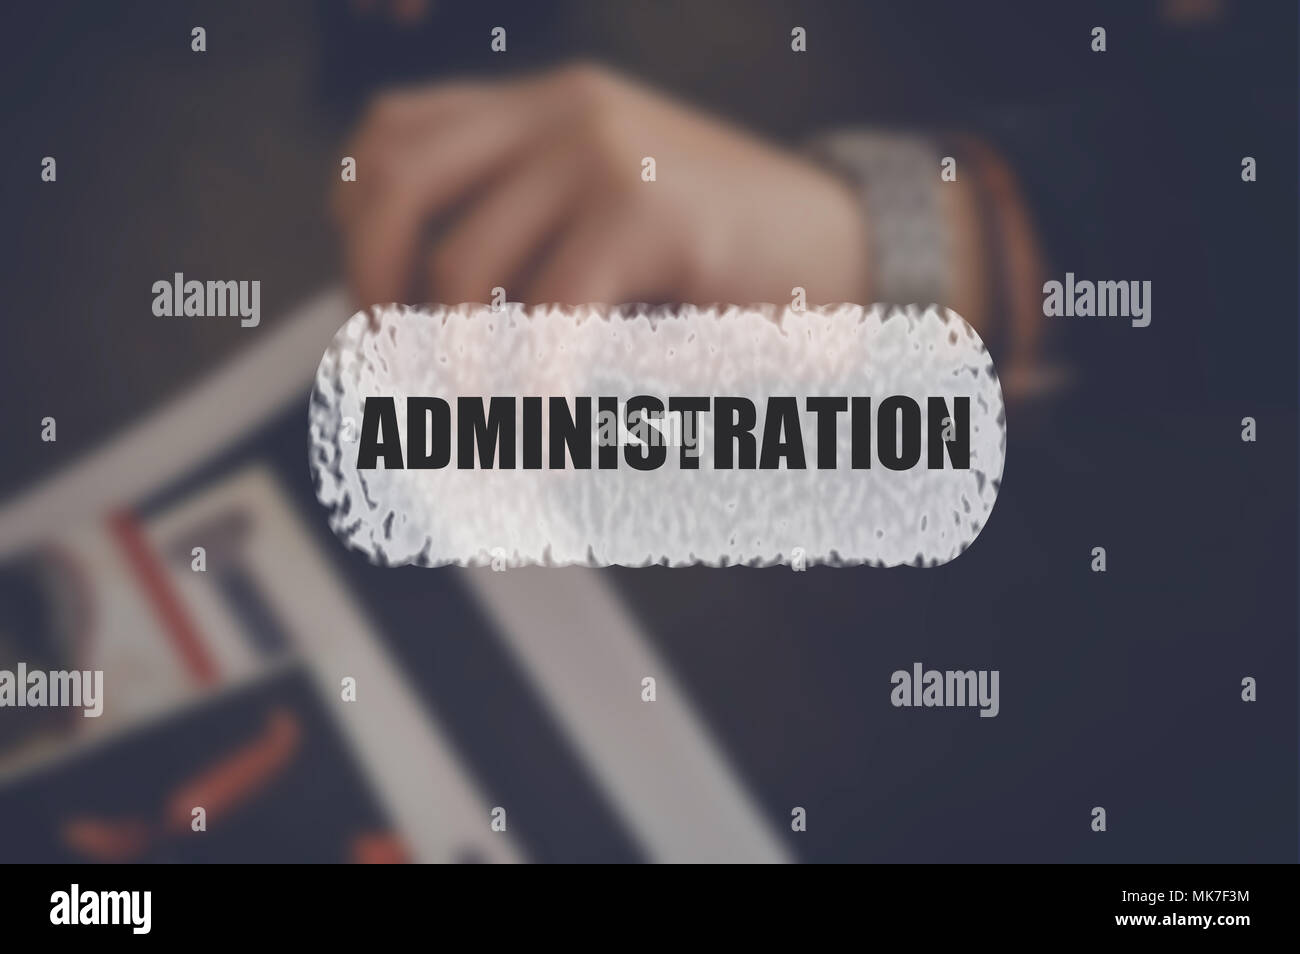 Administration word with blurring business background Stock Photo